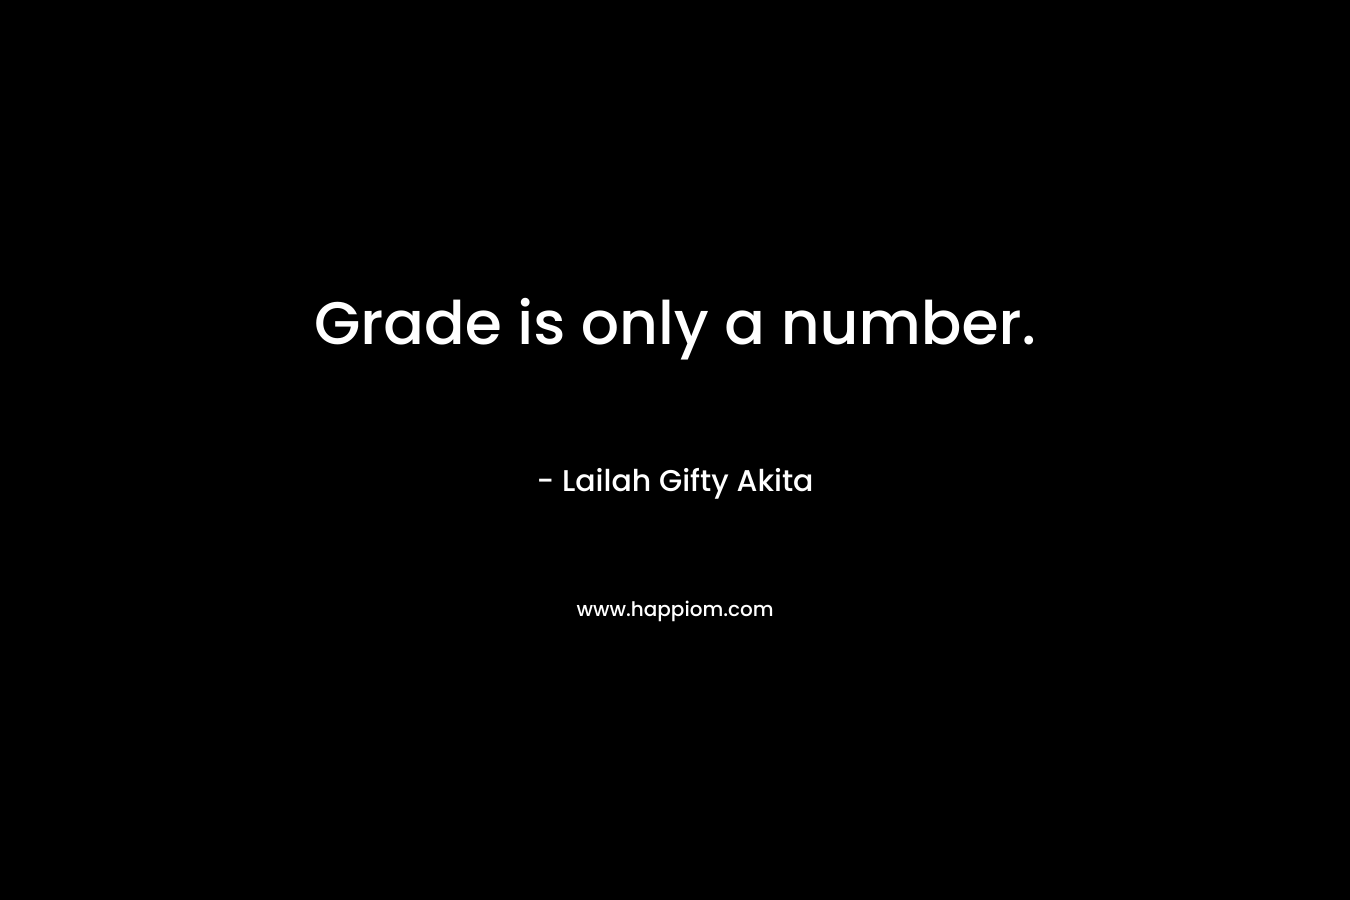 Grade is only a number. – Lailah Gifty Akita